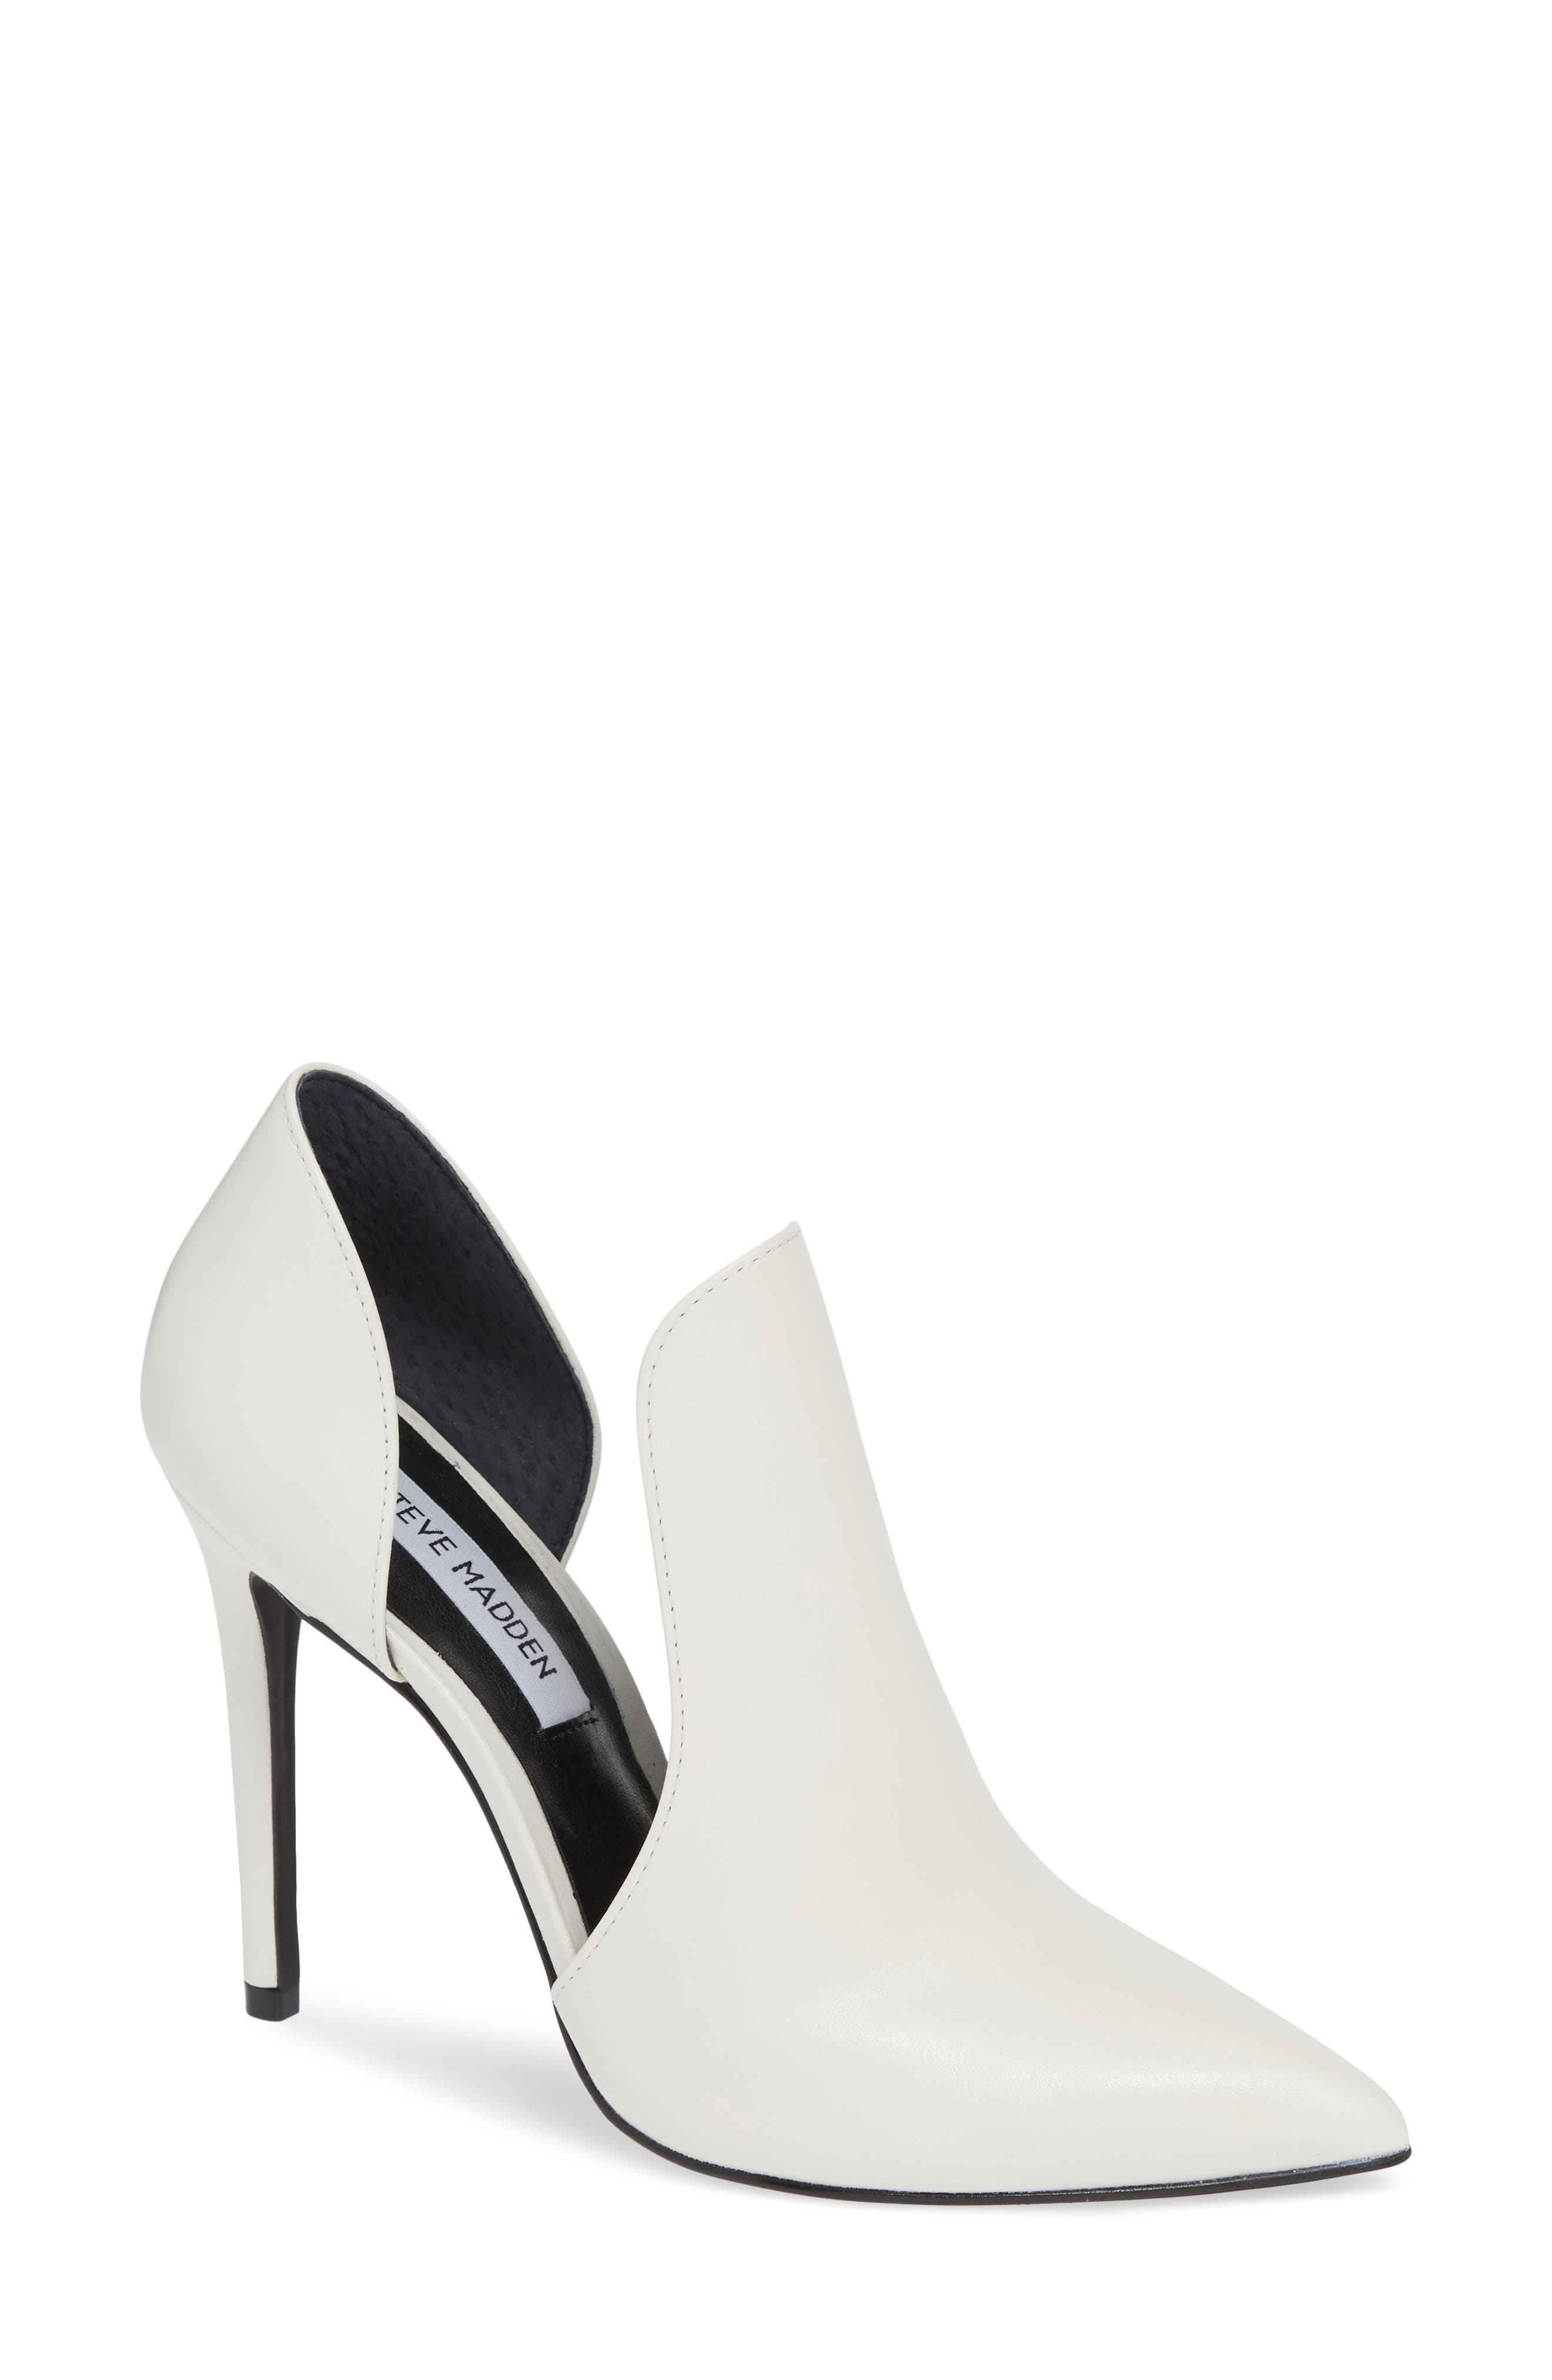 steve madden dolly pointed toe pumps